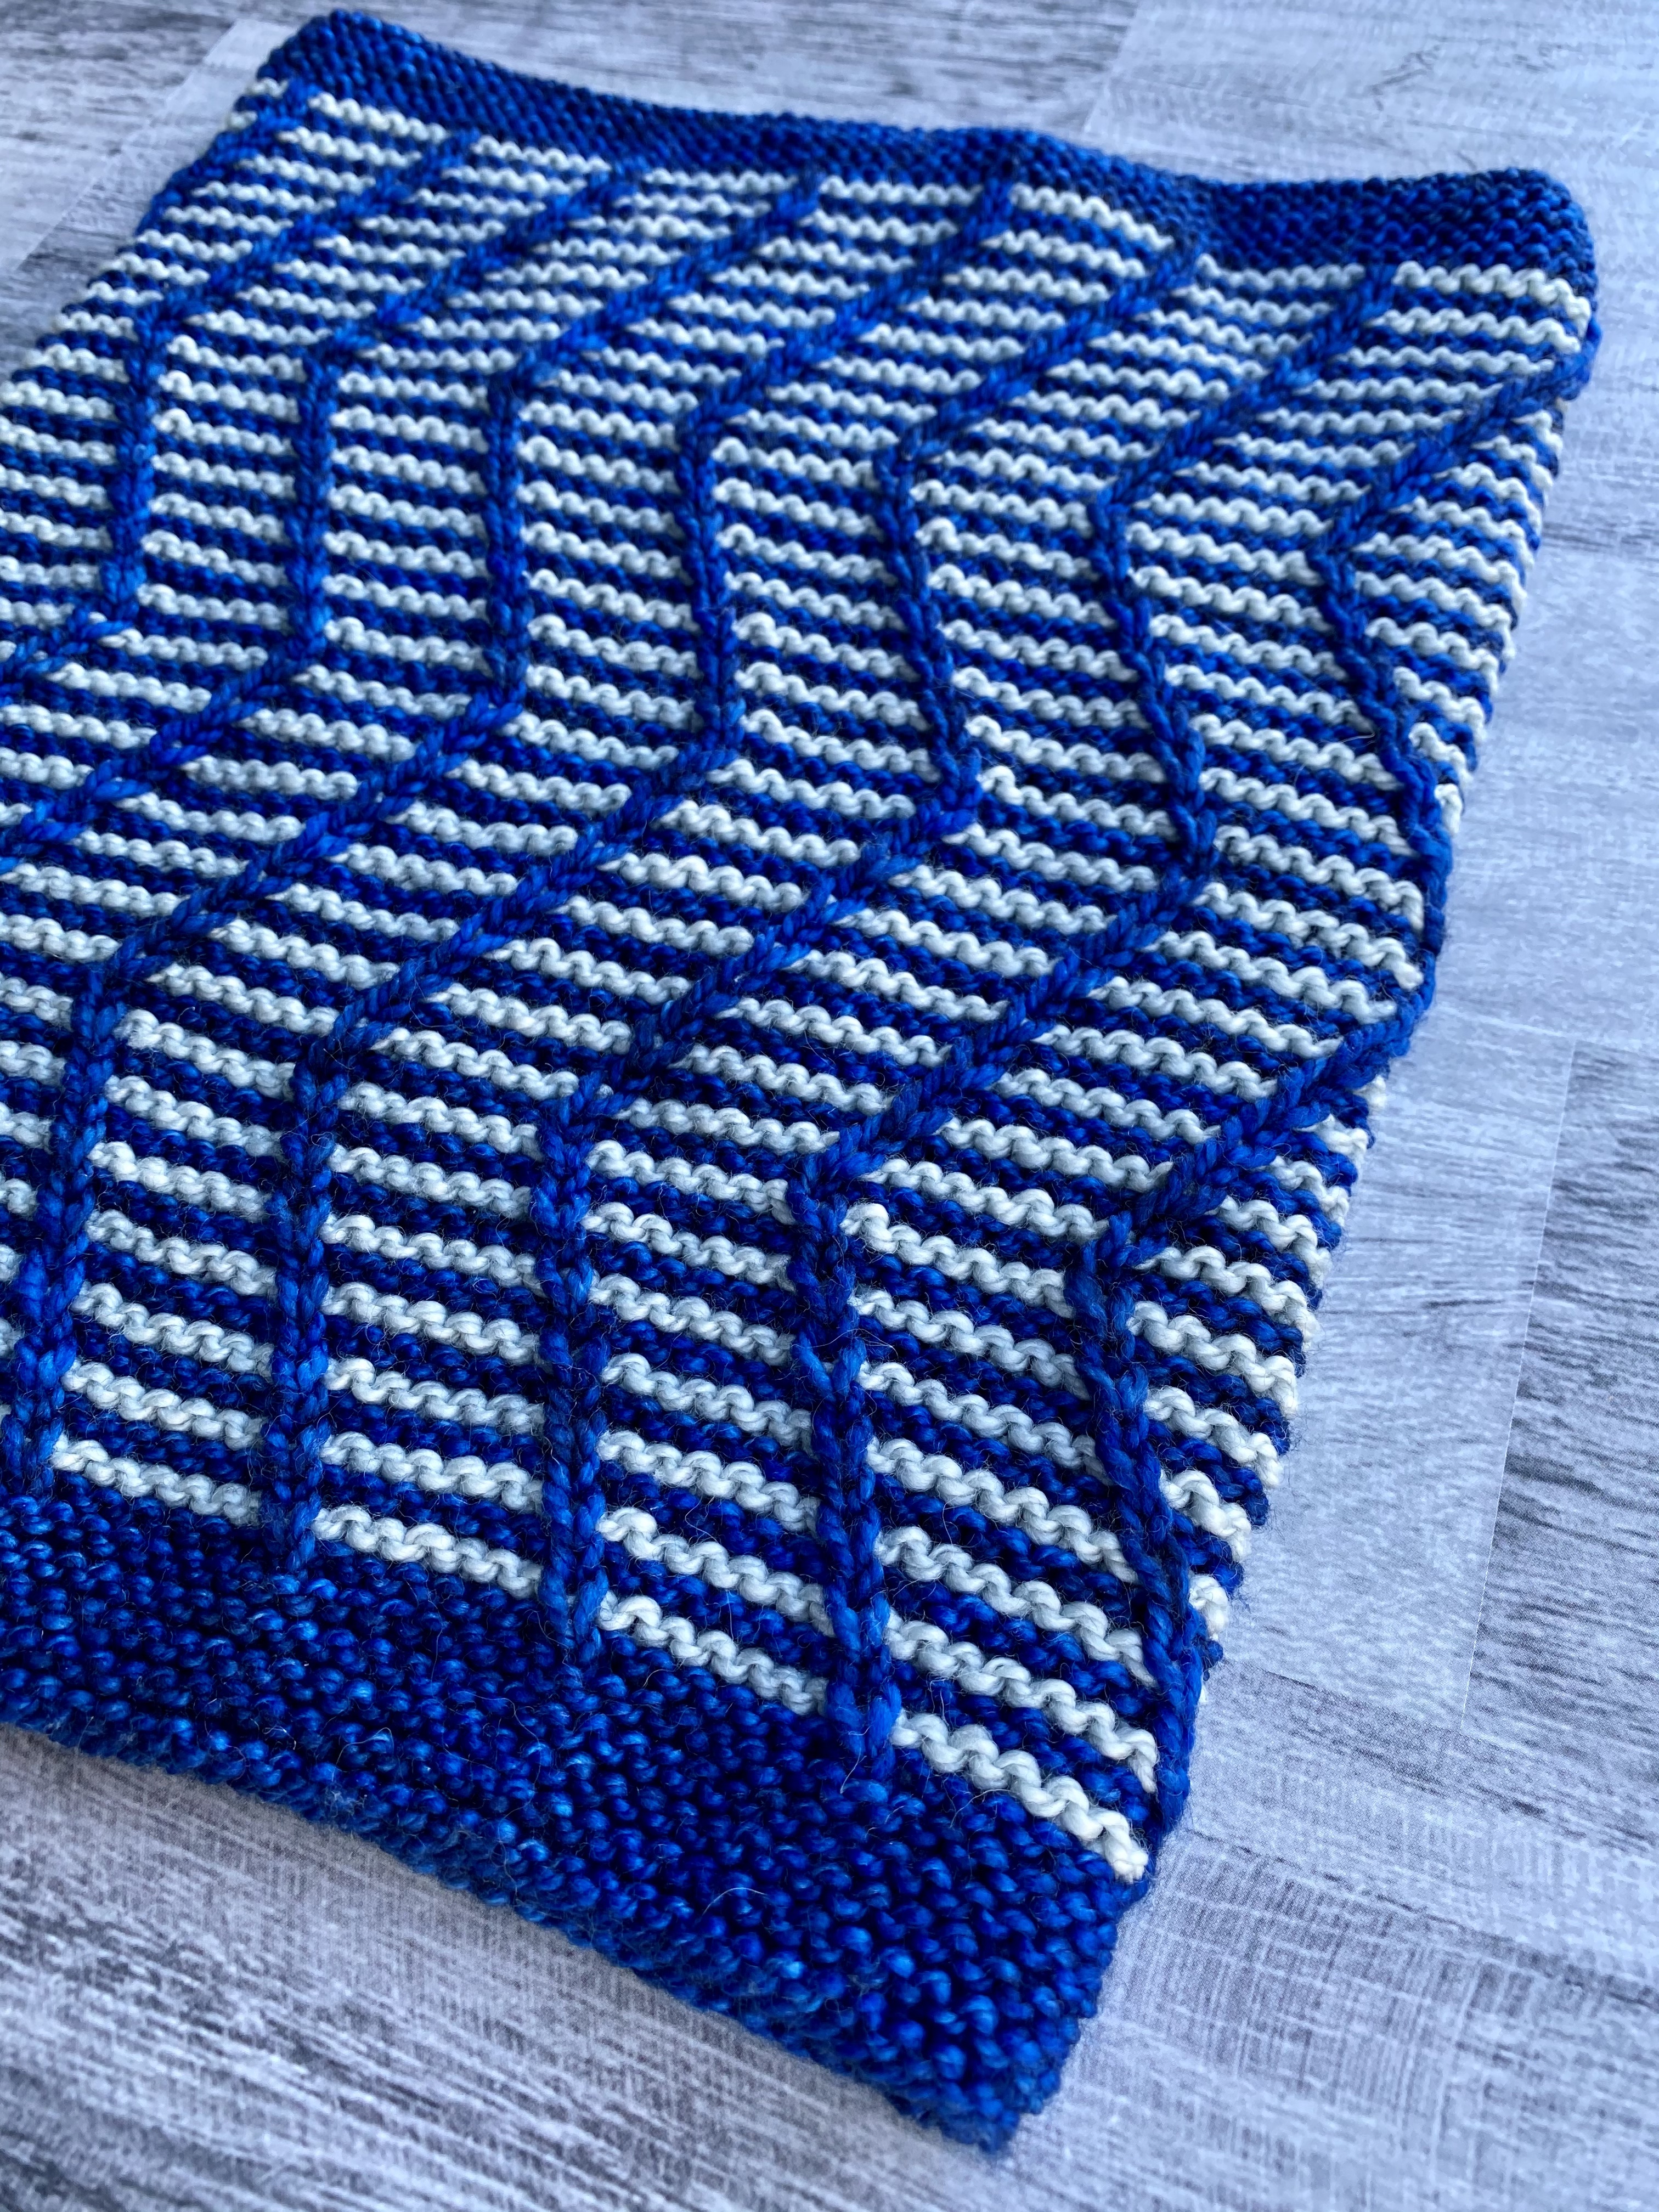 Close up of knitted cowl with blue and grey stripes